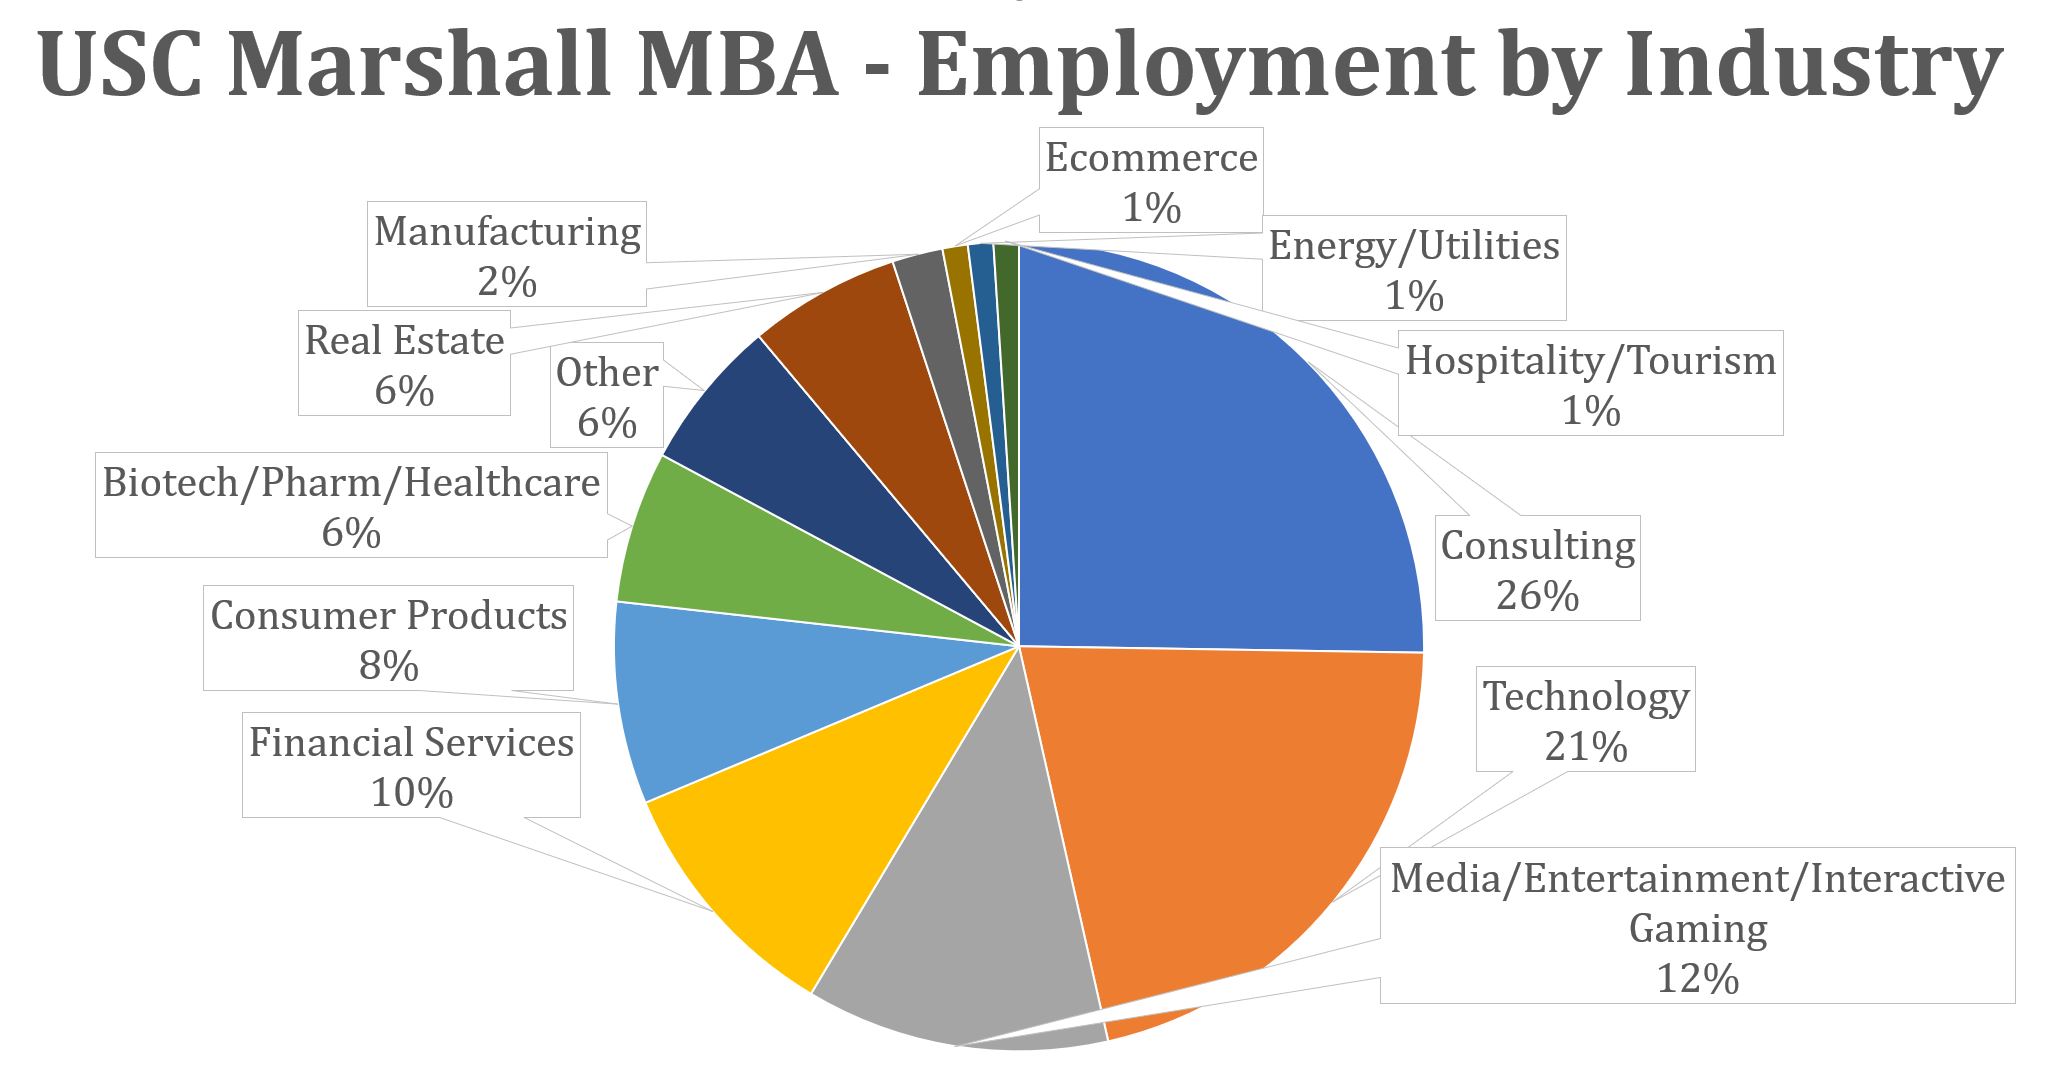 USC Marshall MBA - Employment by Industry